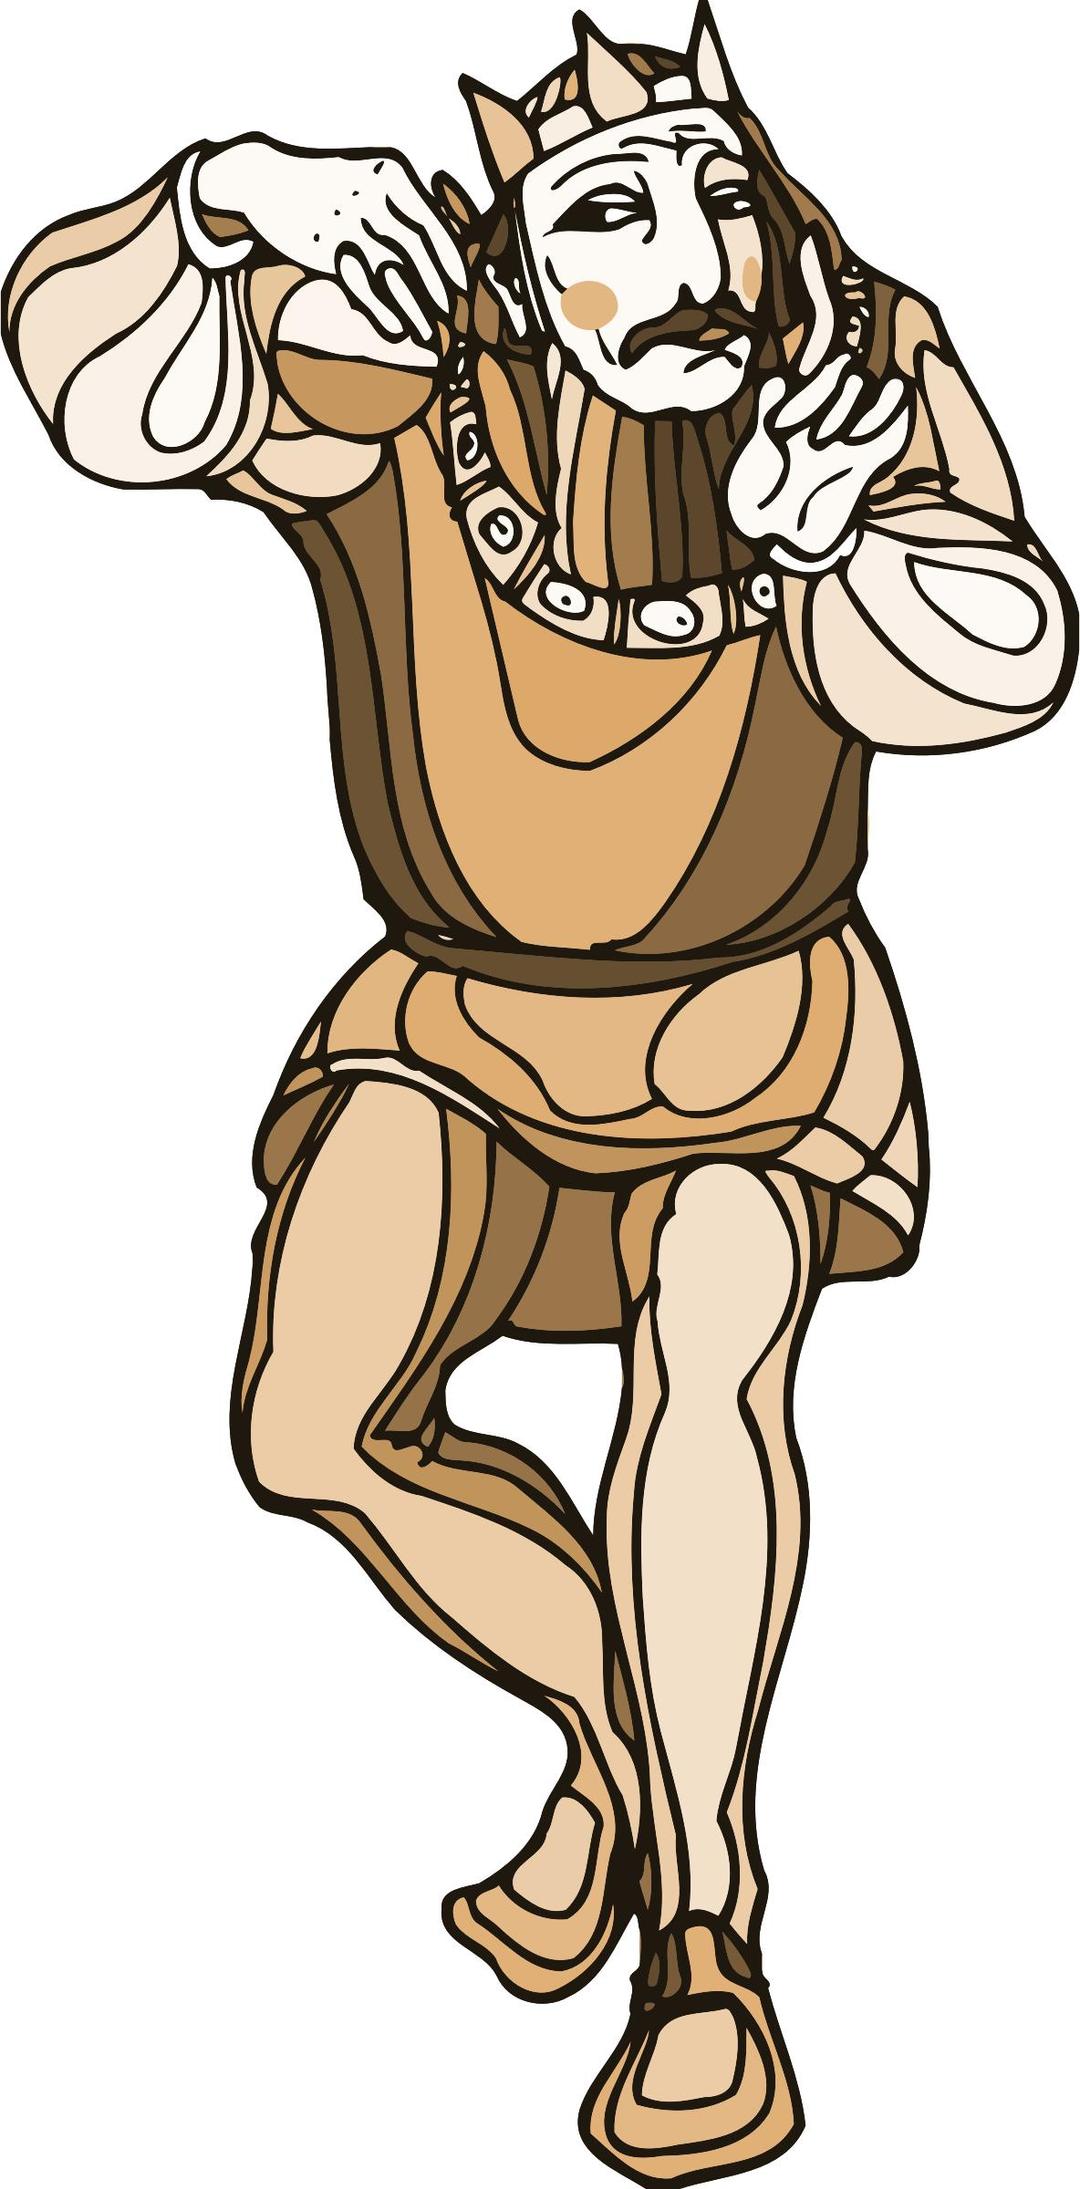 Shakespeare characters - King png transparent